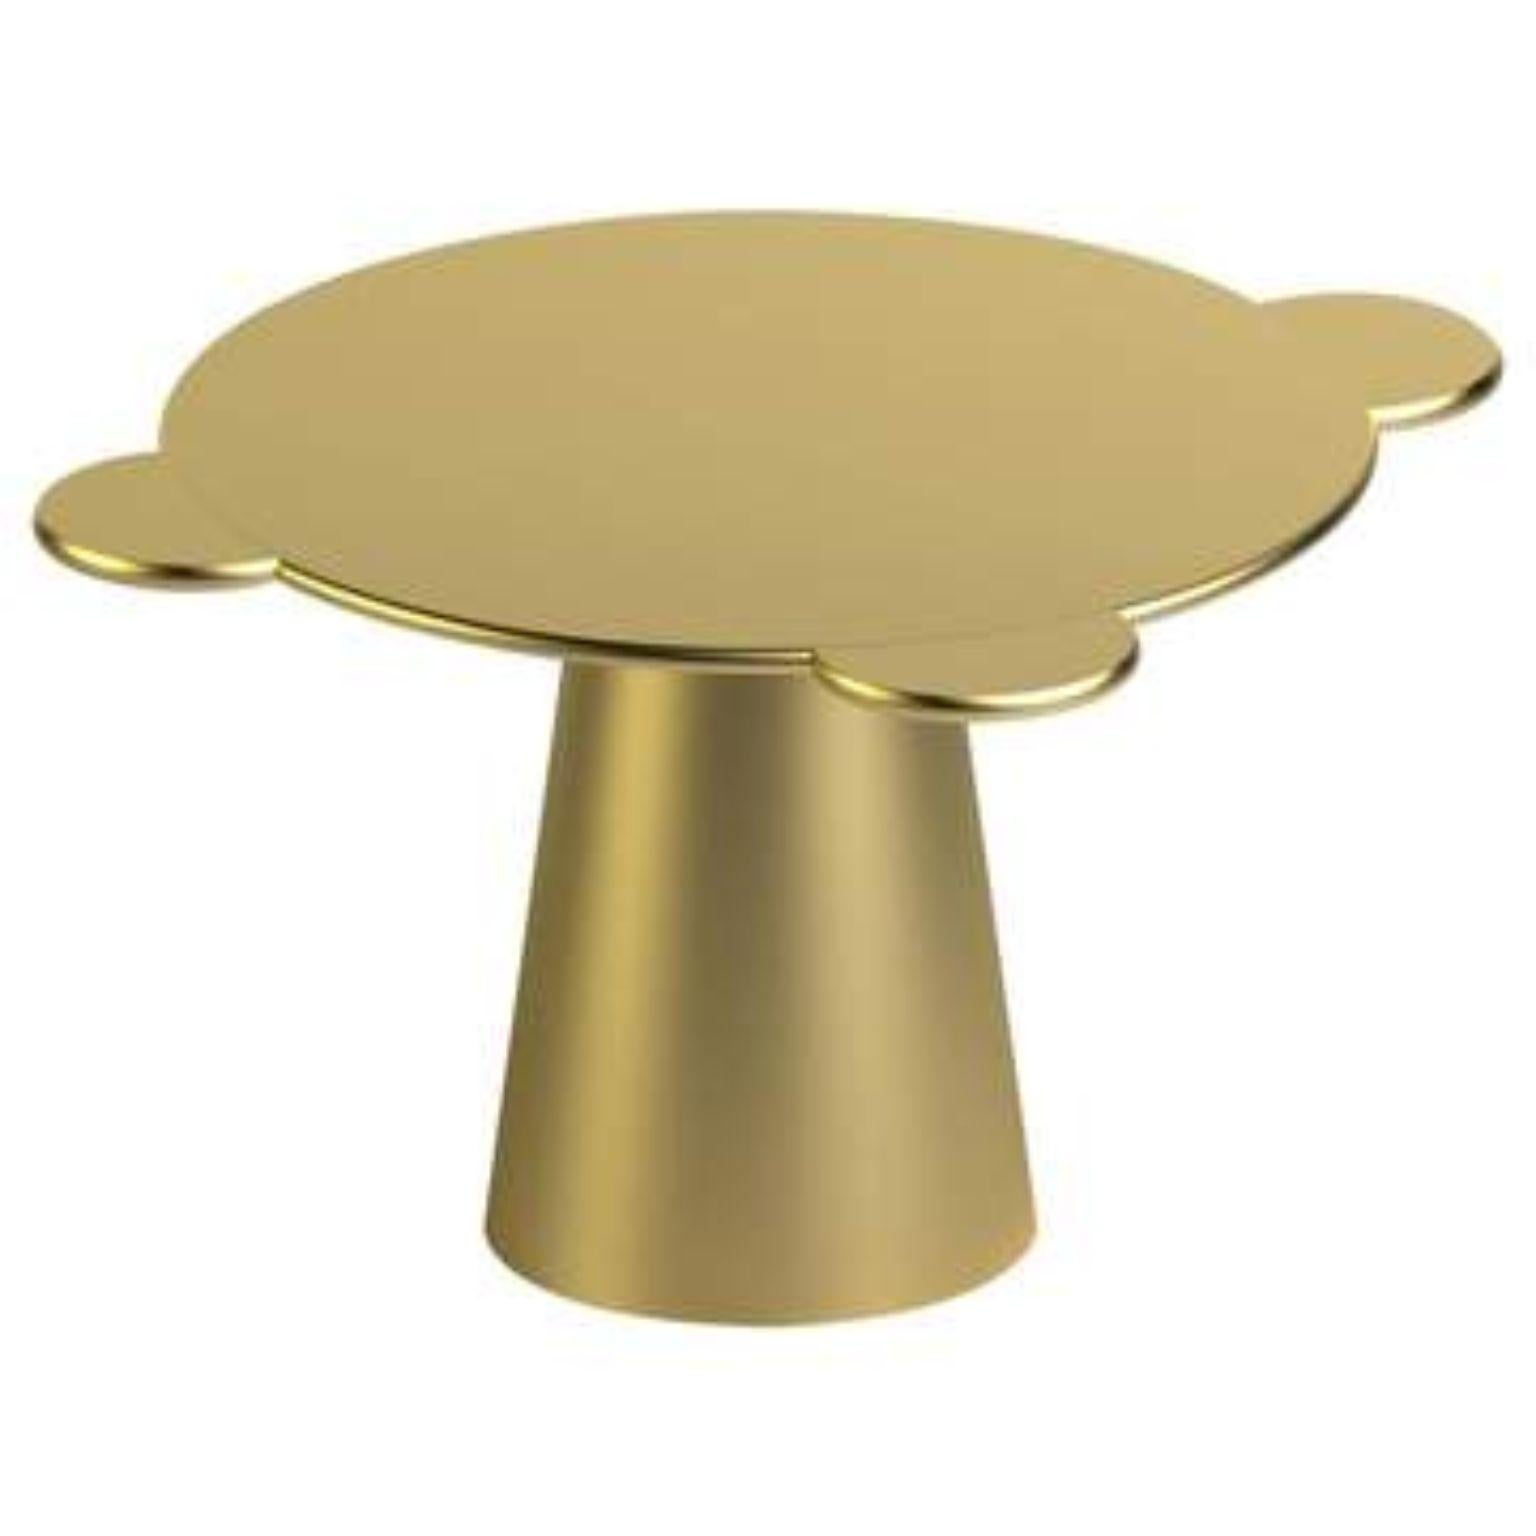 Gold lacquered wood contemporary Donald table by Chapel Petrassi
Dimensions: 140 x 77.5 cm
Materials: gold lacquered wood

Chapel Petrassi is a contemporary design and manufacturing company based in Paris and Naples founded by designers